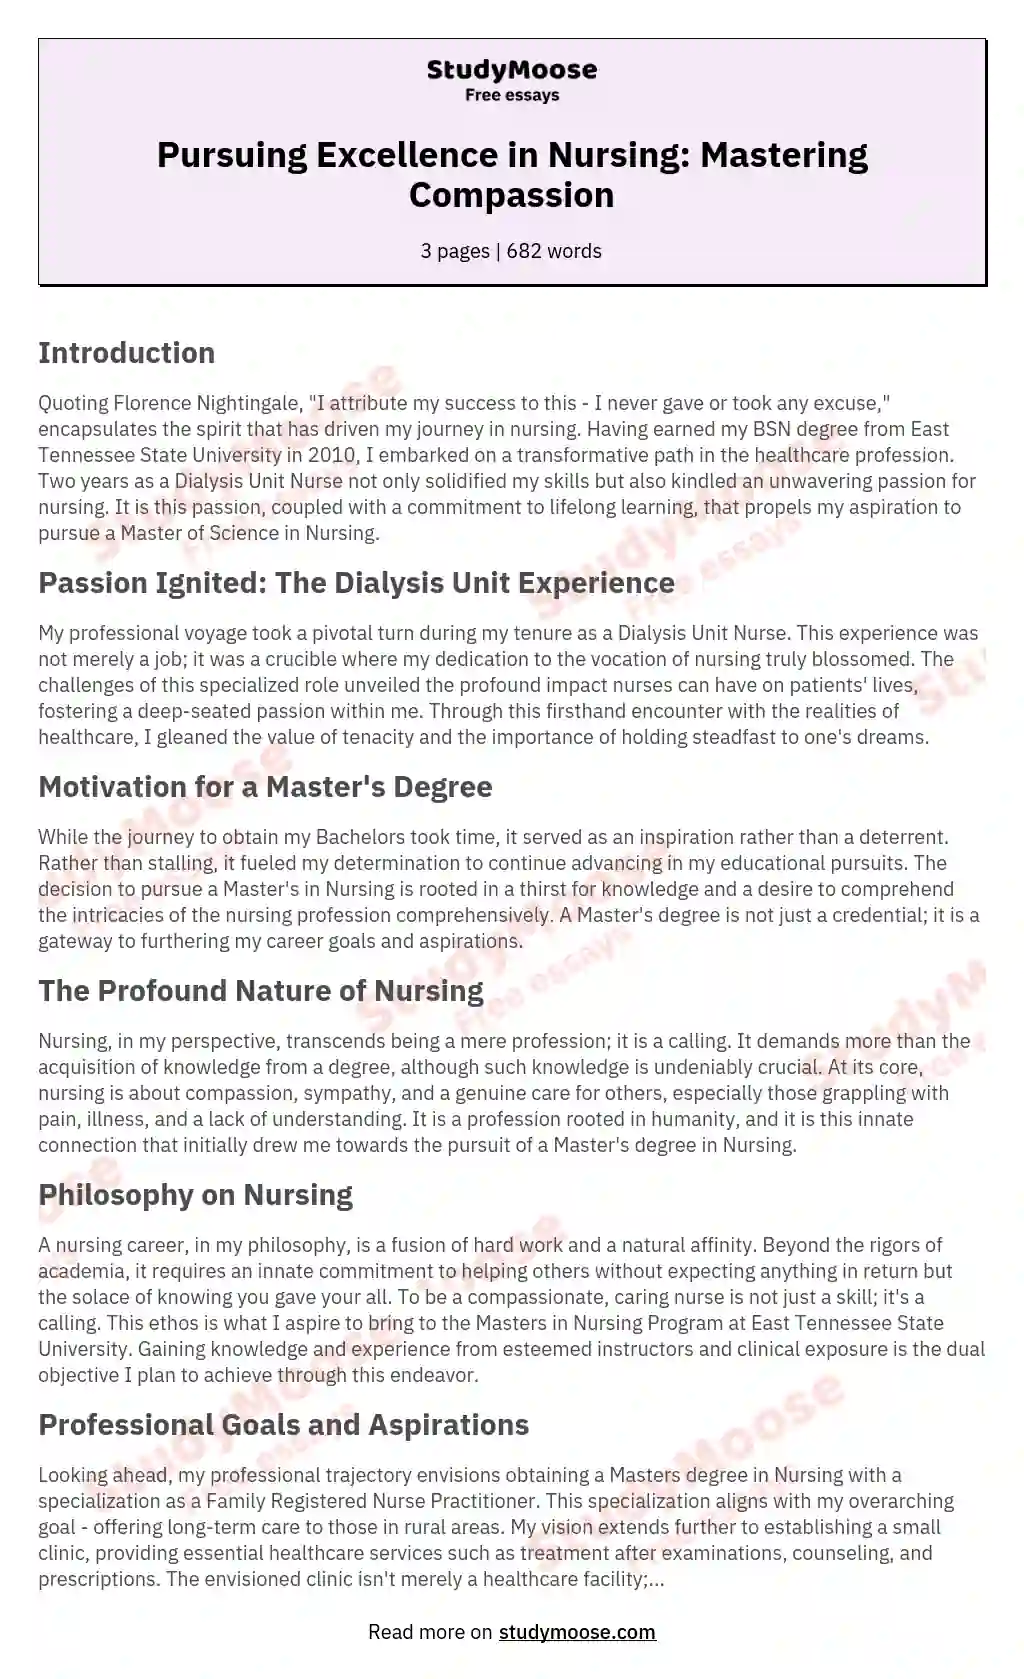 Pursuing Excellence in Nursing: Mastering Compassion essay